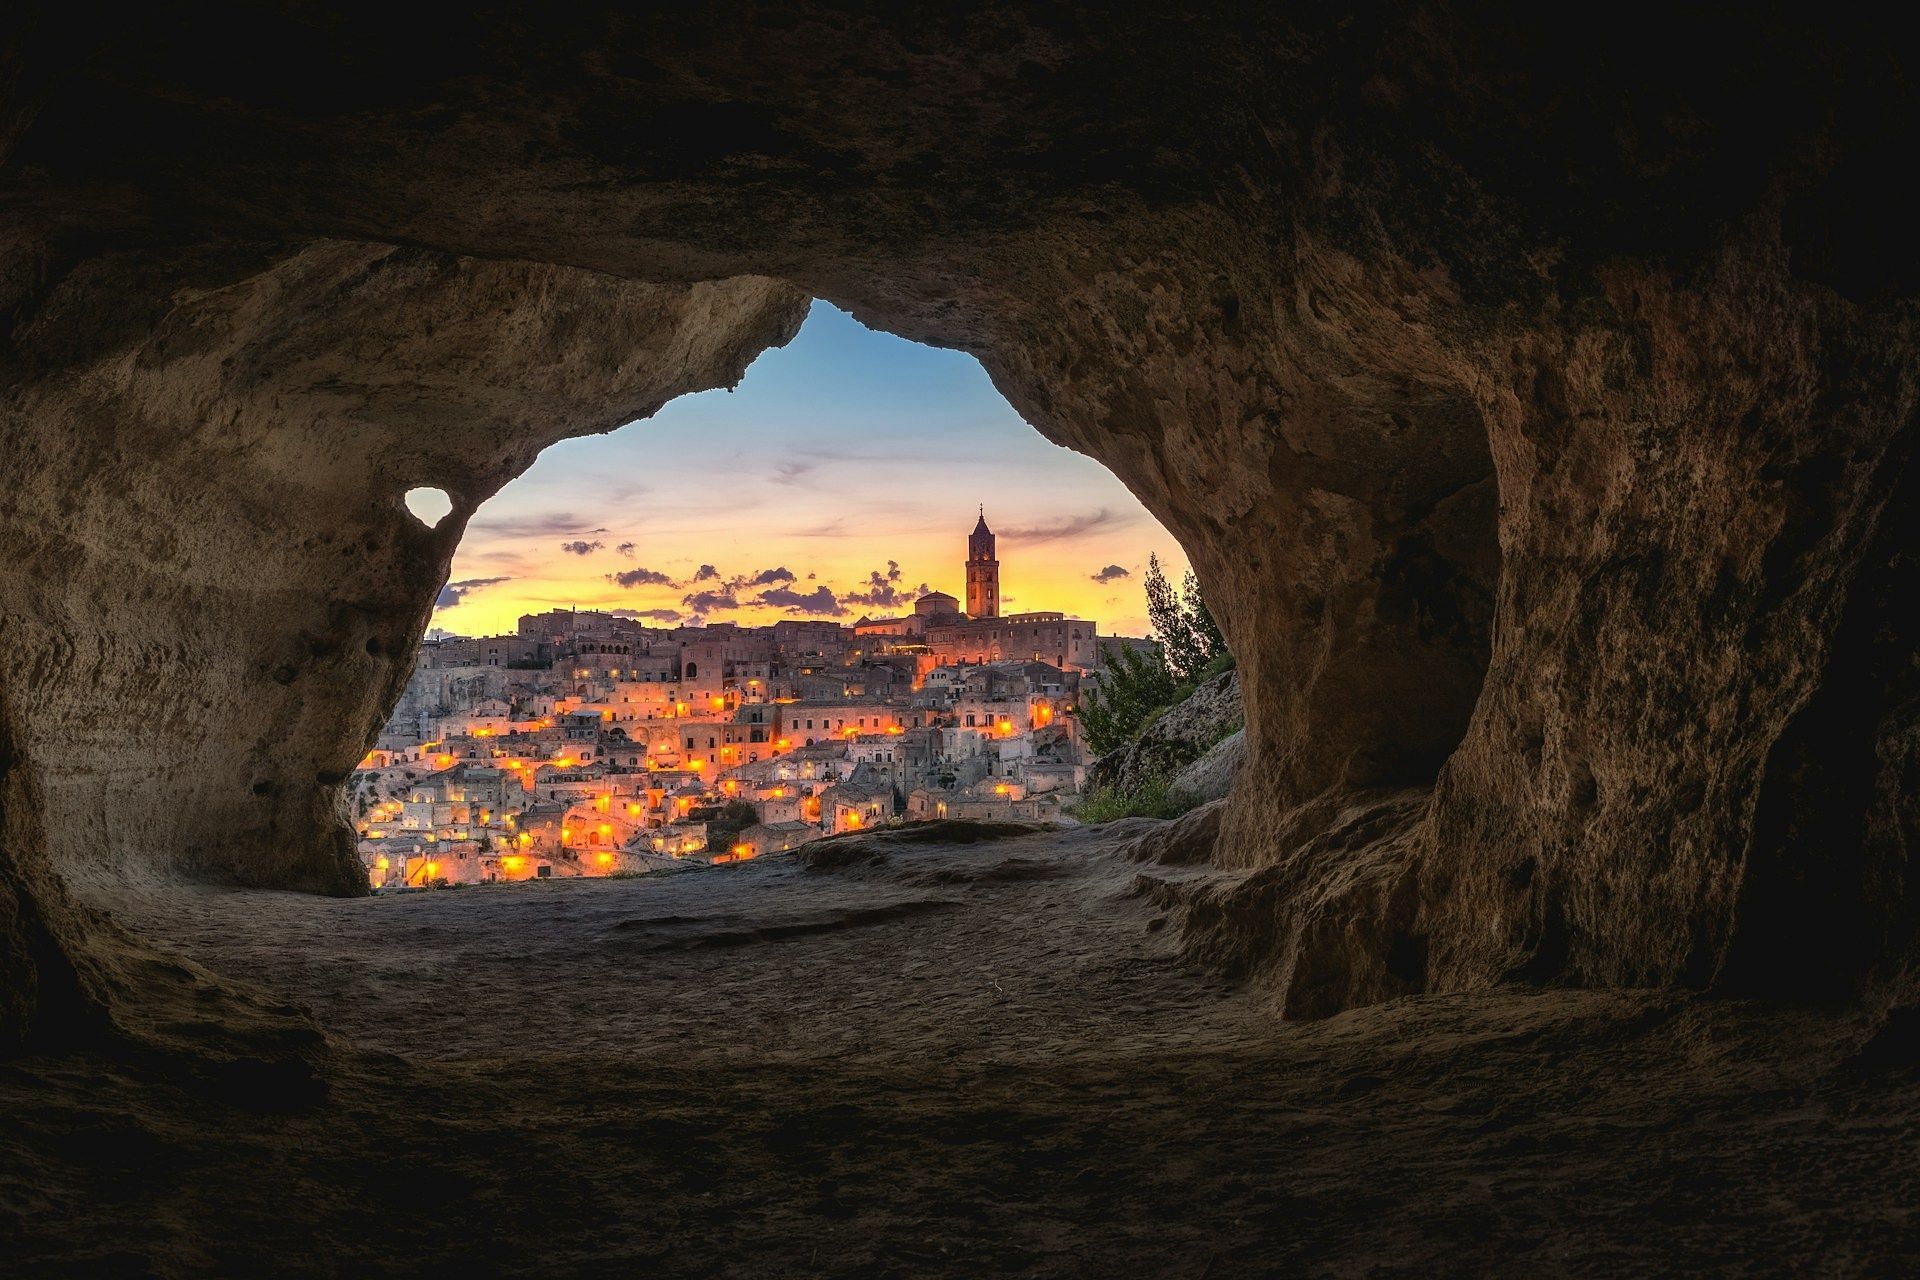 Major portions of The Book of Clarence were shot in Matera, Italy (Image via Unsplash/Luca Micheli)